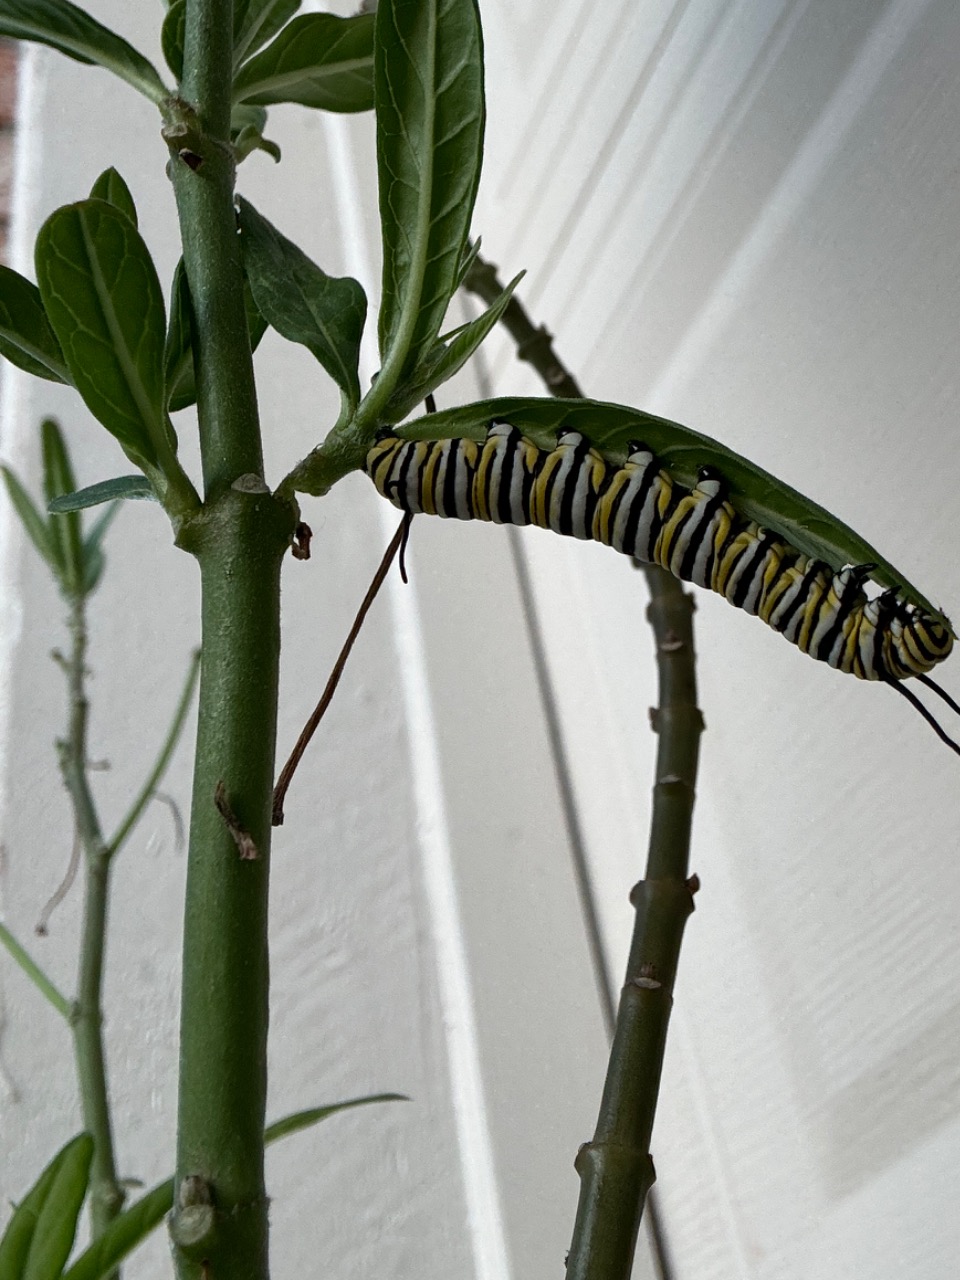 A monarch caterpillar on a green plant, upside down, in front of a white background